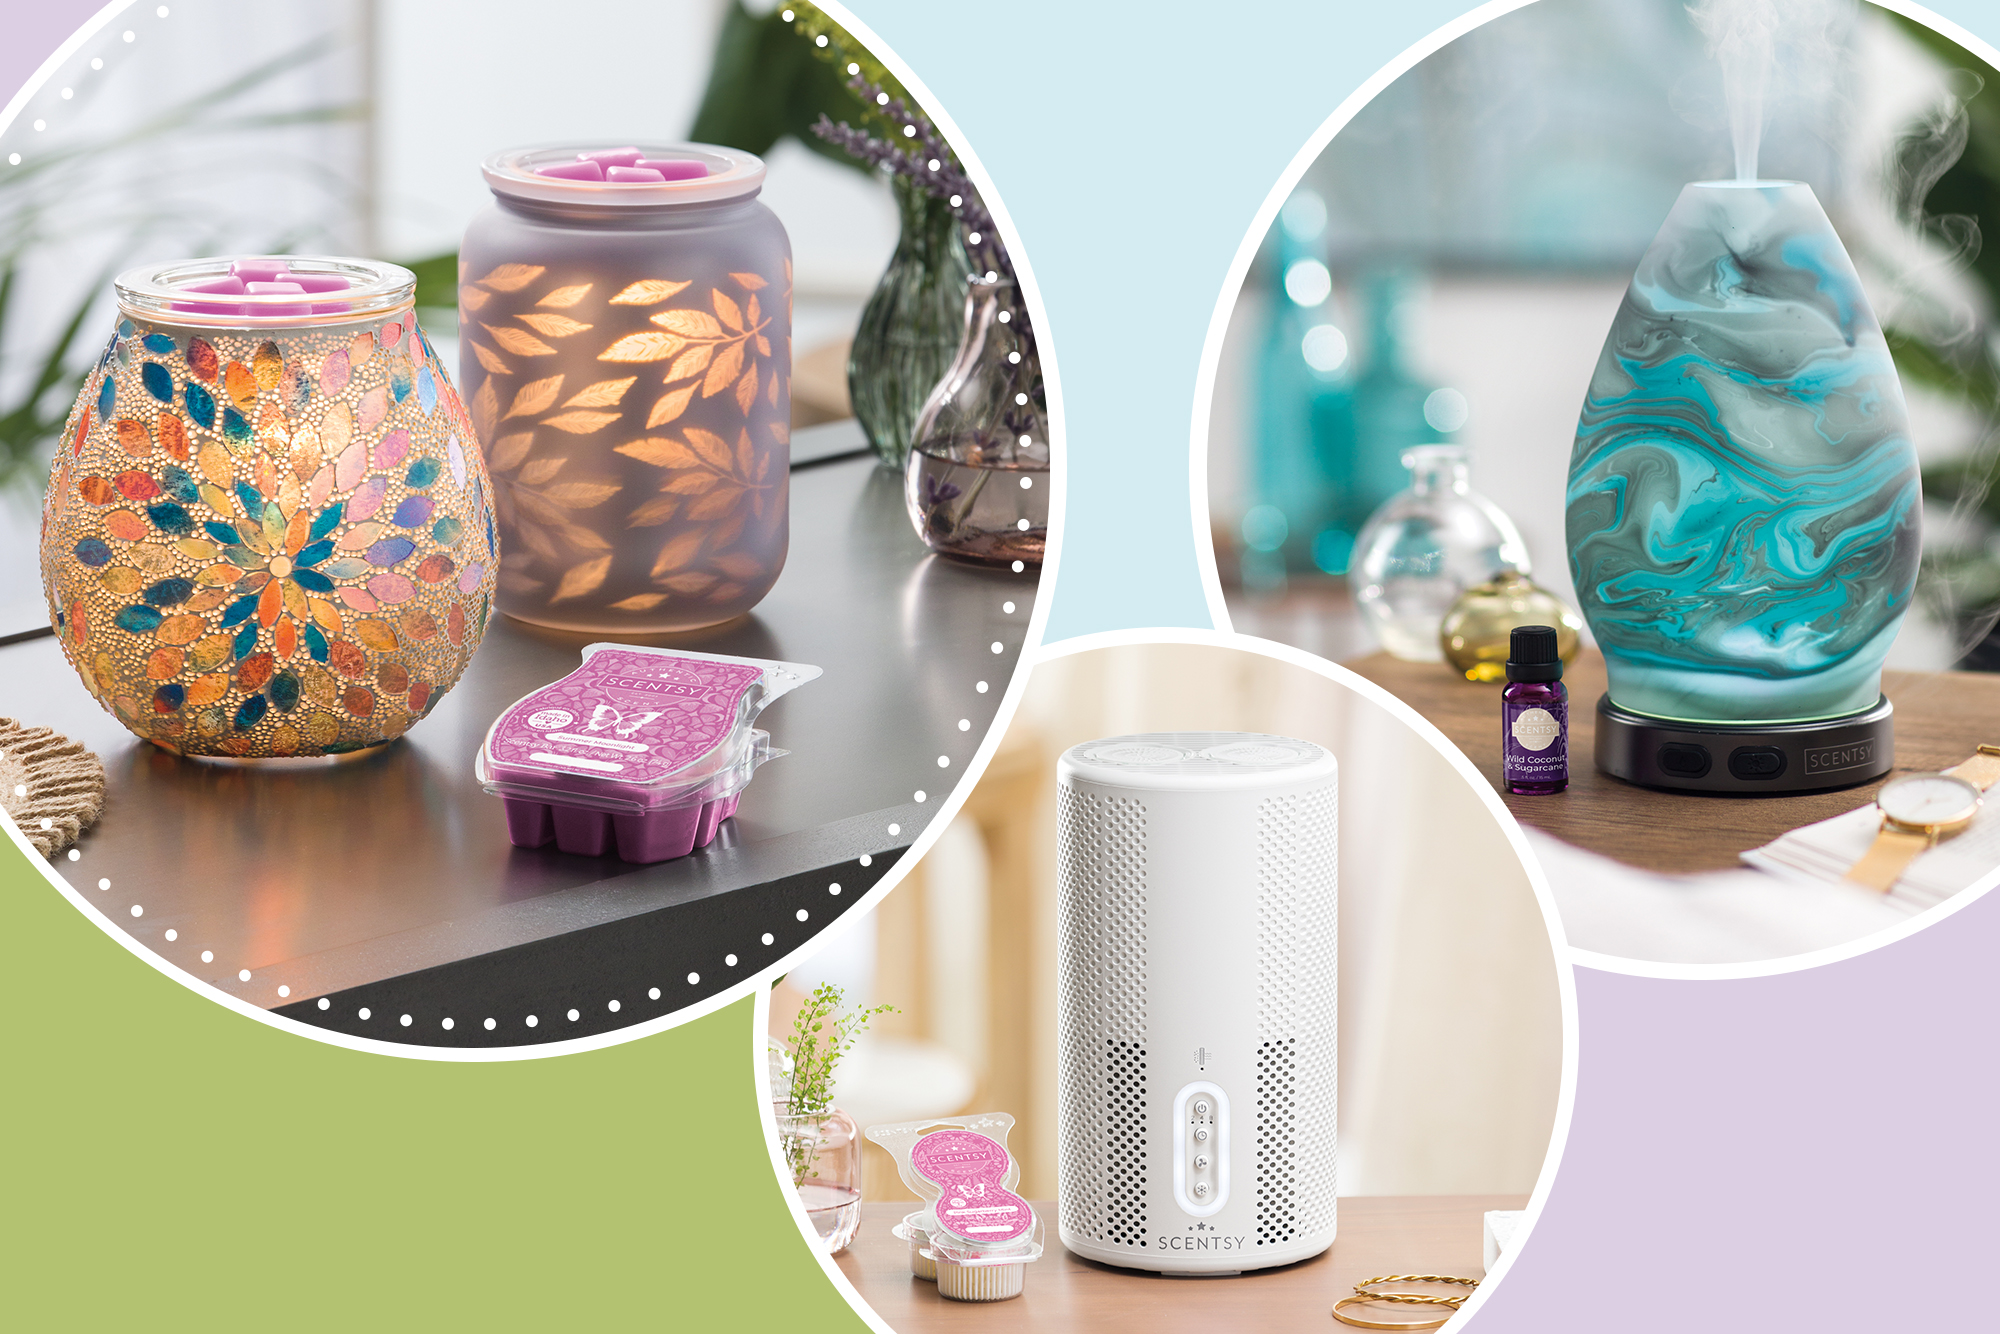 How to choose the best Scentsy fragrance system for you